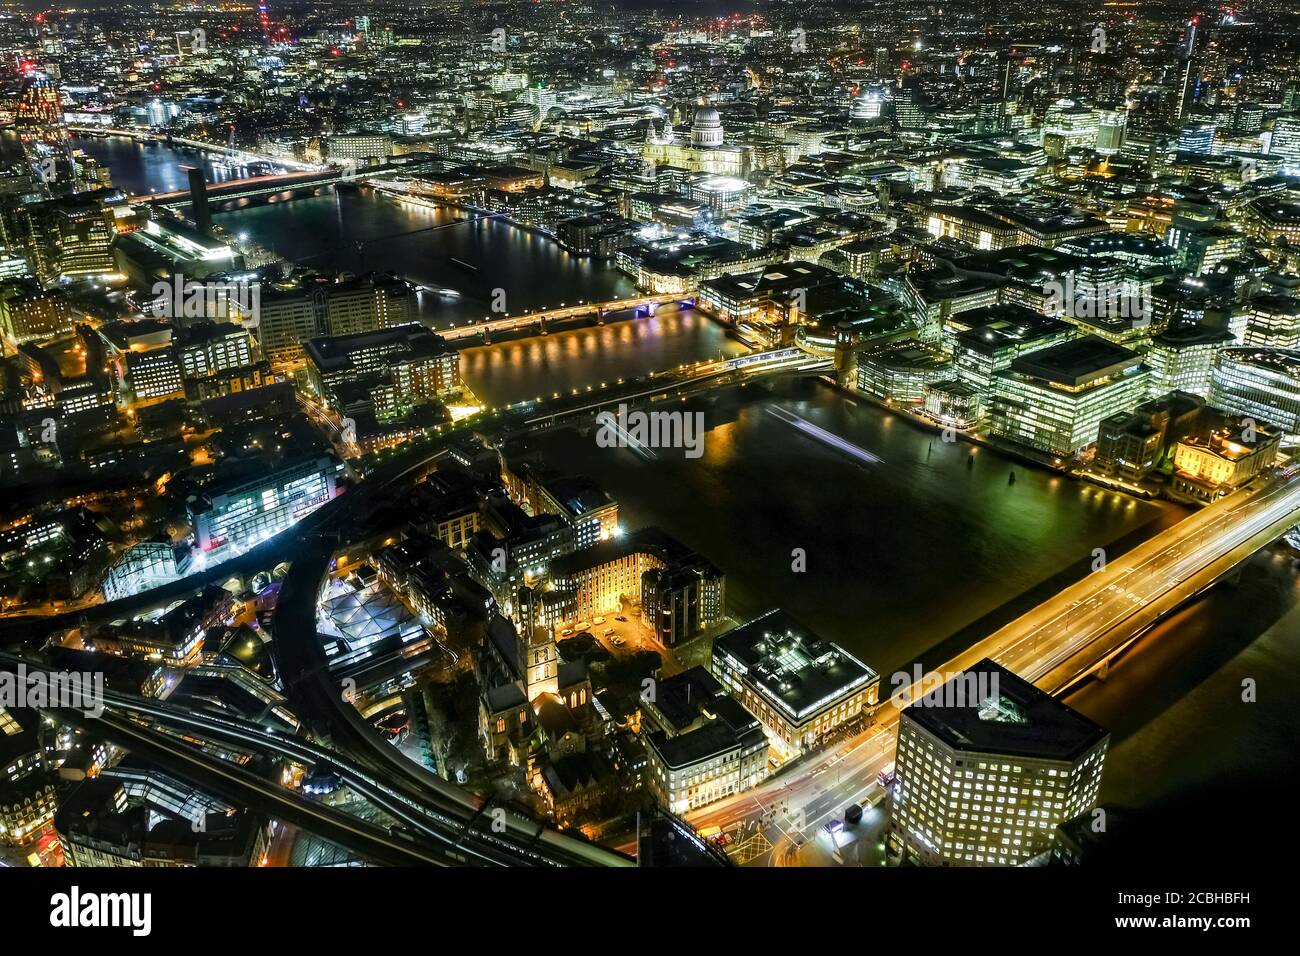 Night-time aerial view of Central London and the River Thames.  London Bridge, Millennium Bridge and Southwark Bridge are all visible. Stock Photo